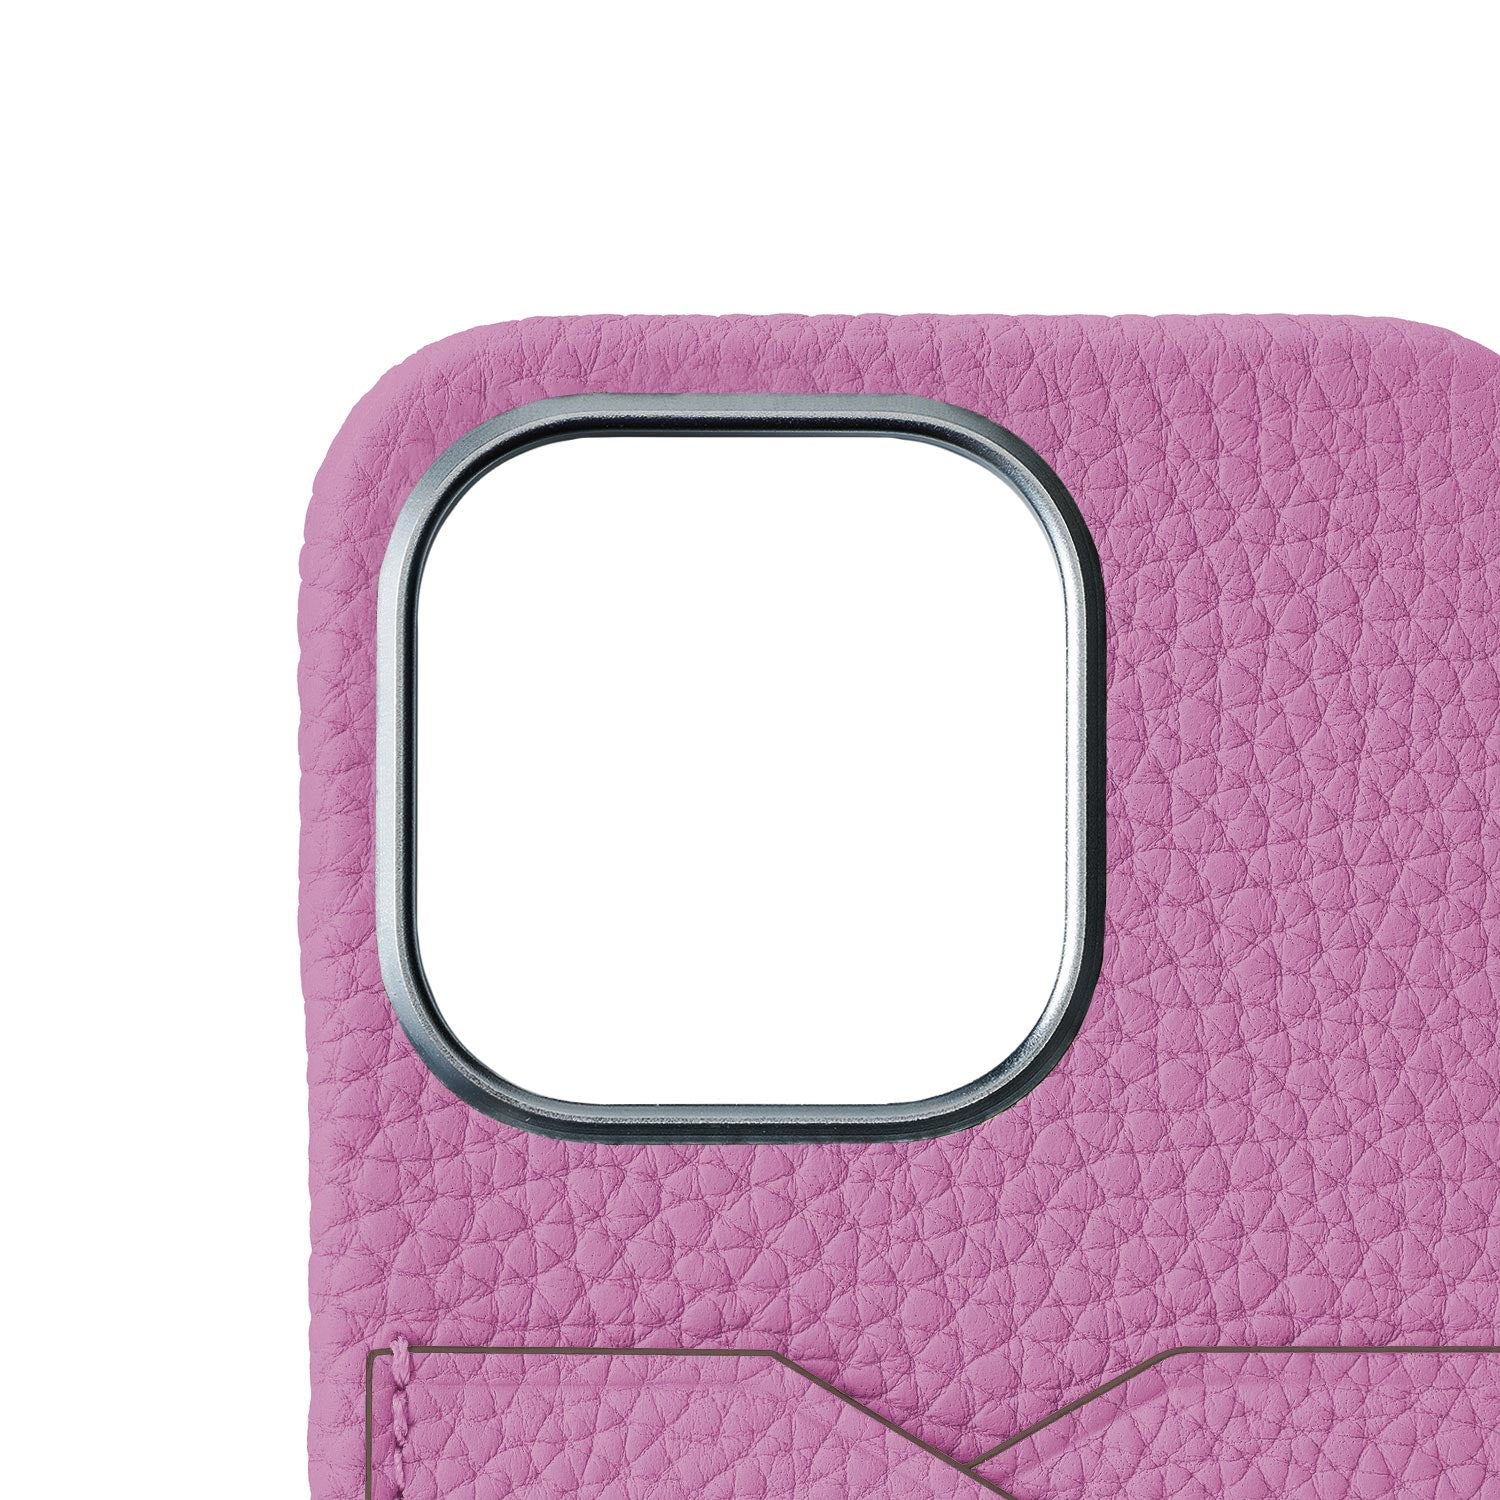 (iPhone 15 Pro) Back cover case Shrink leather